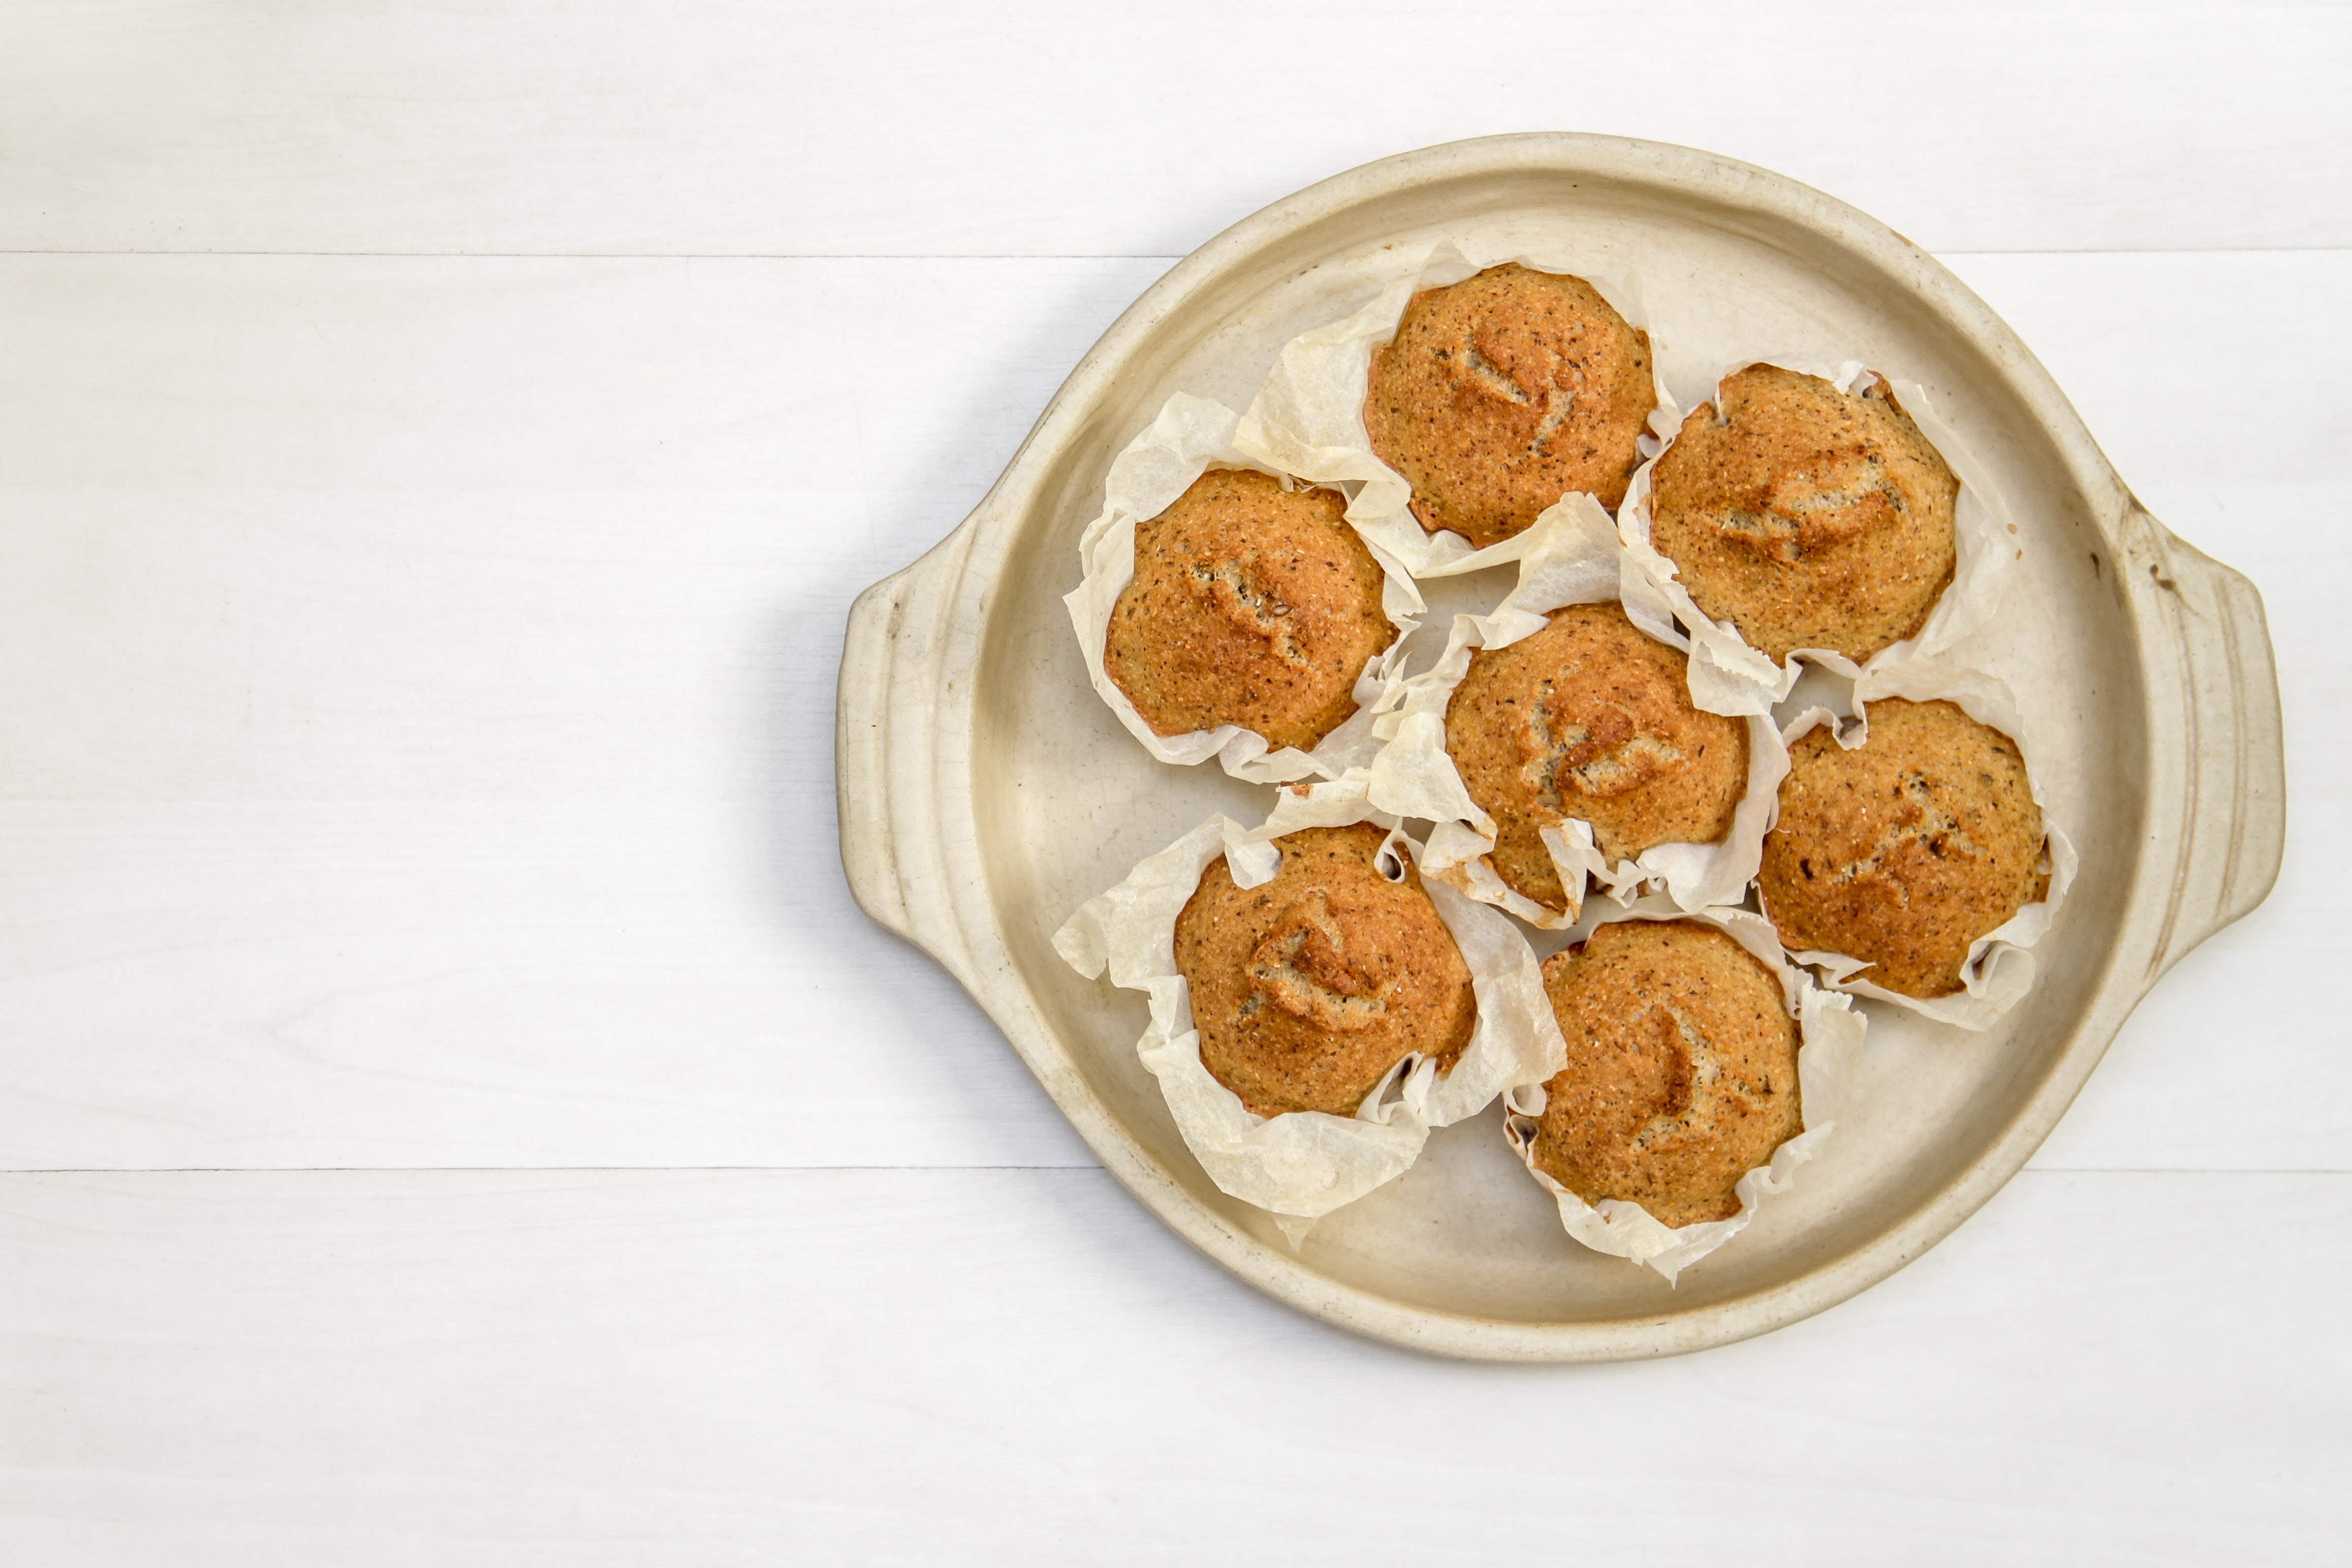 Seven muffins are arranged in a circular shape on a white tray.